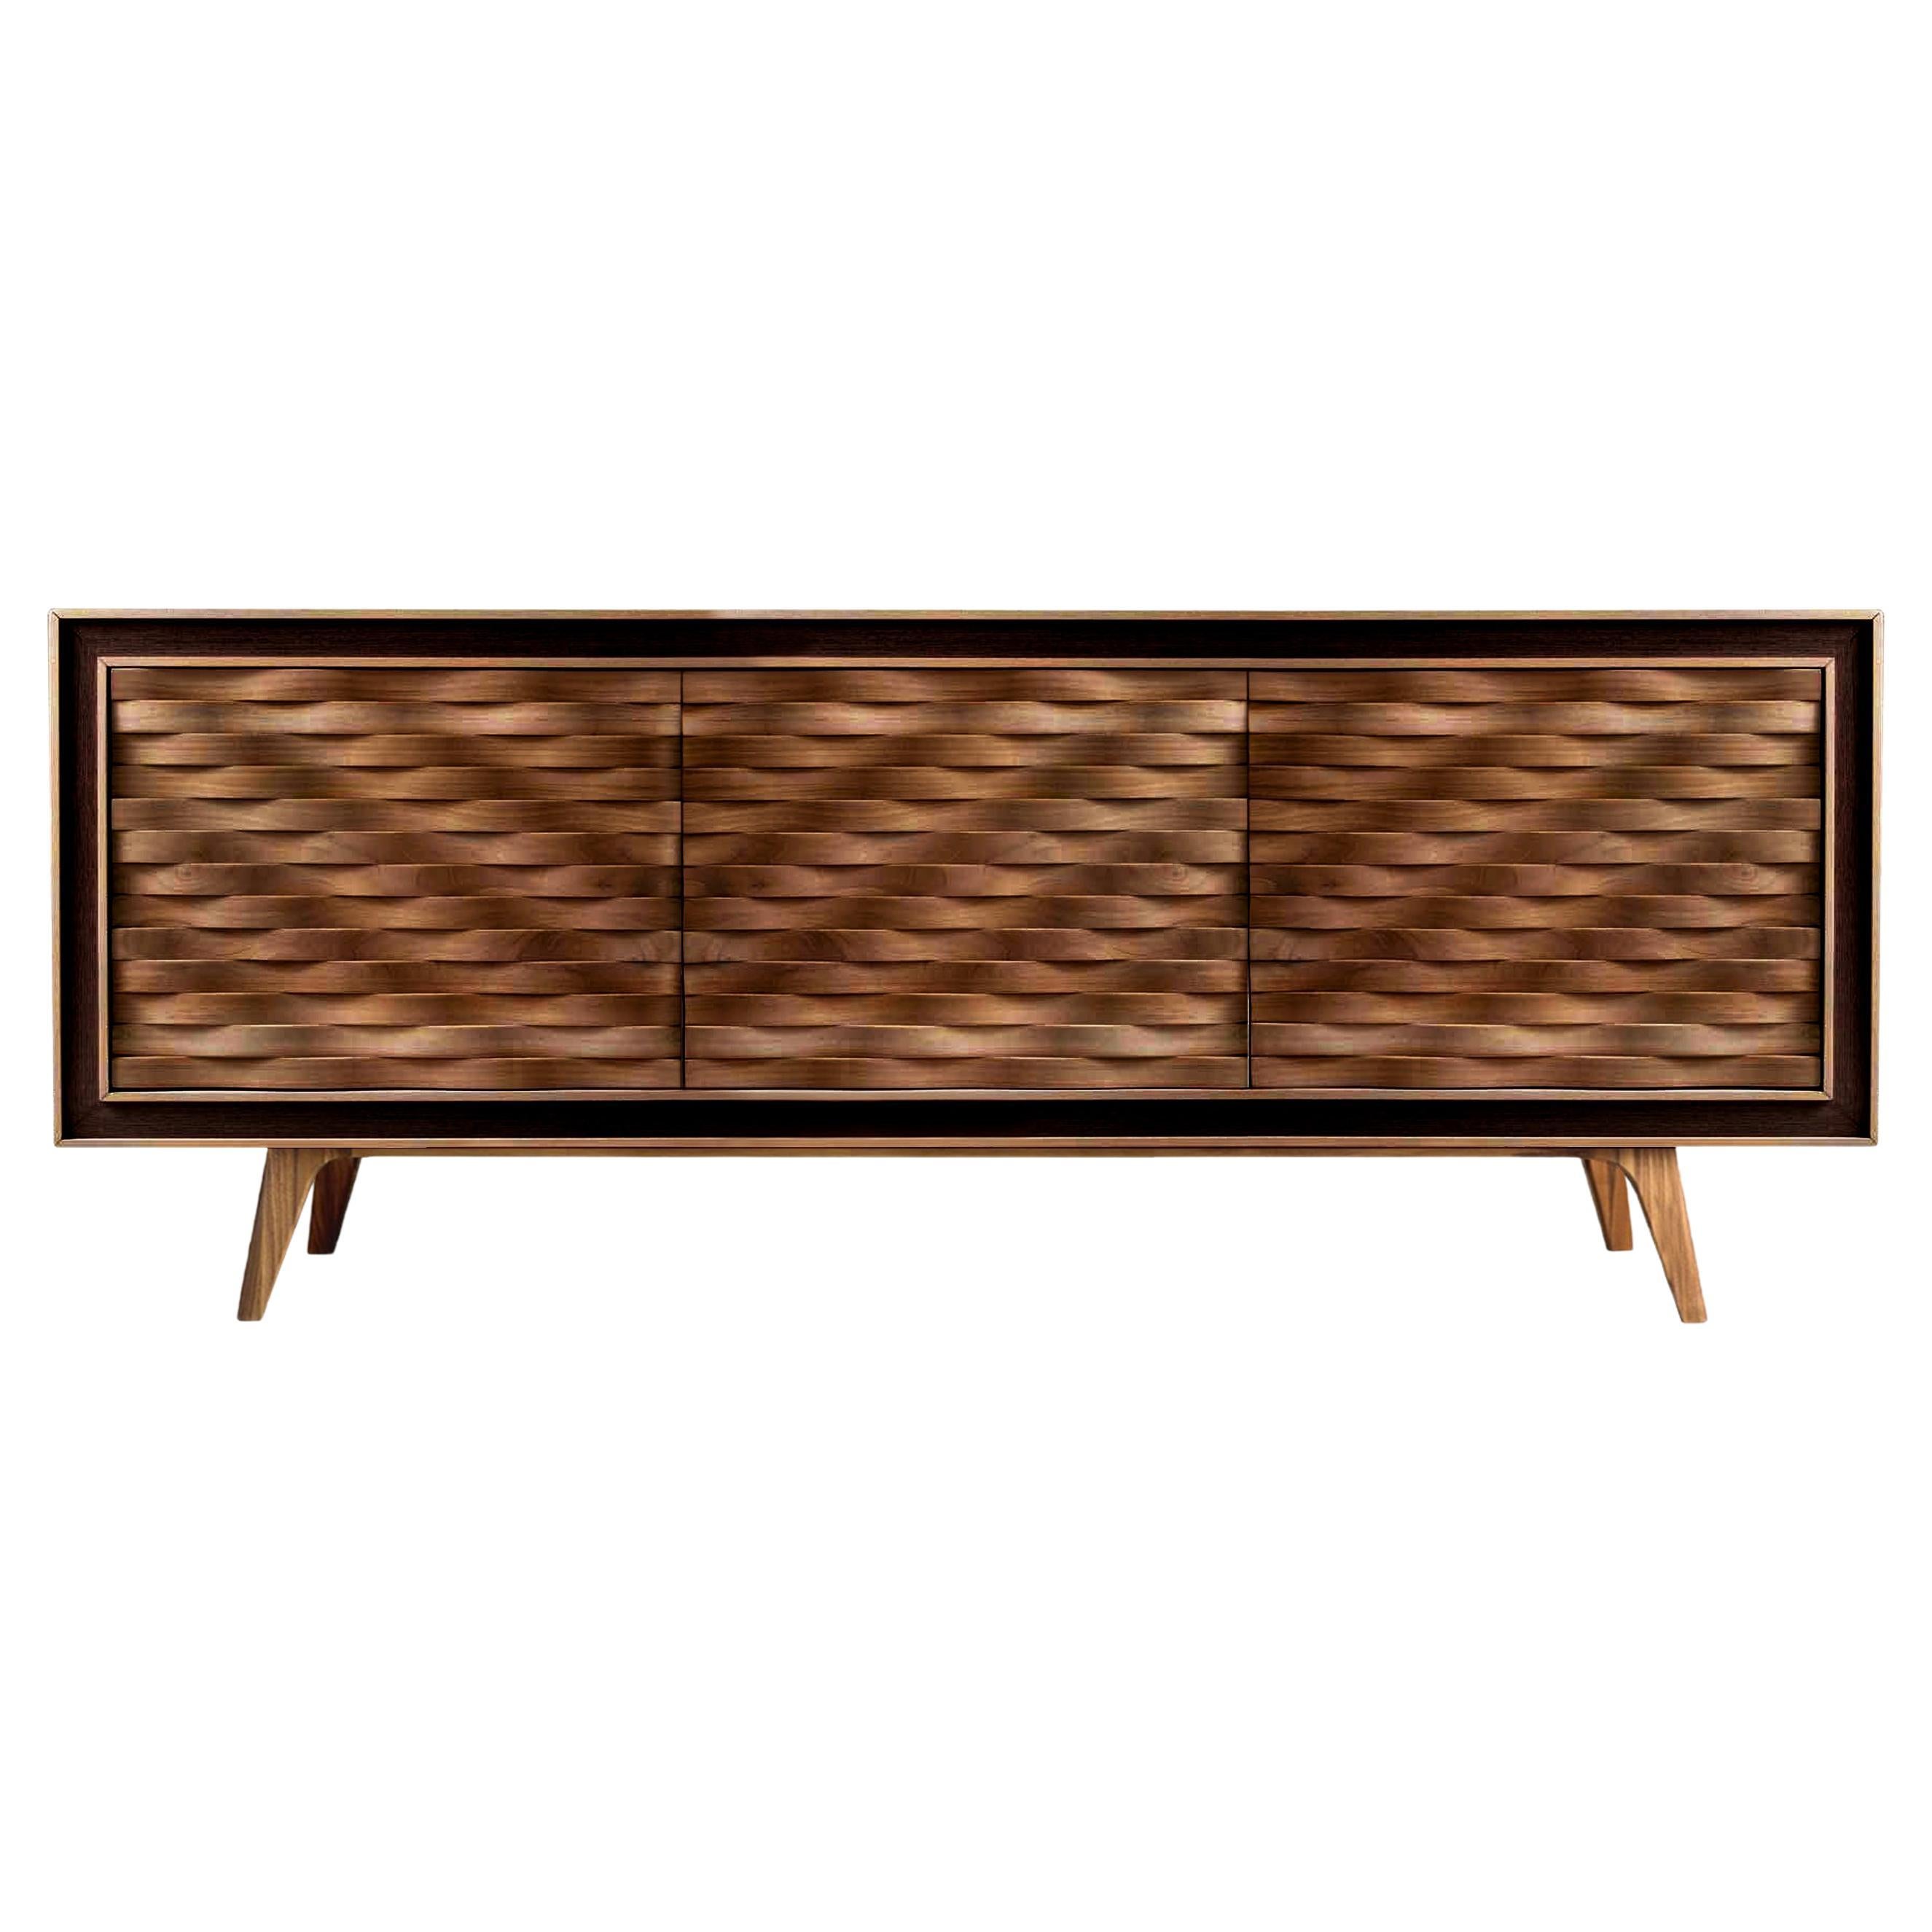 Quadra Nastro Solid Wood Sideboard, Walnut in Natural Finish, Contemporary